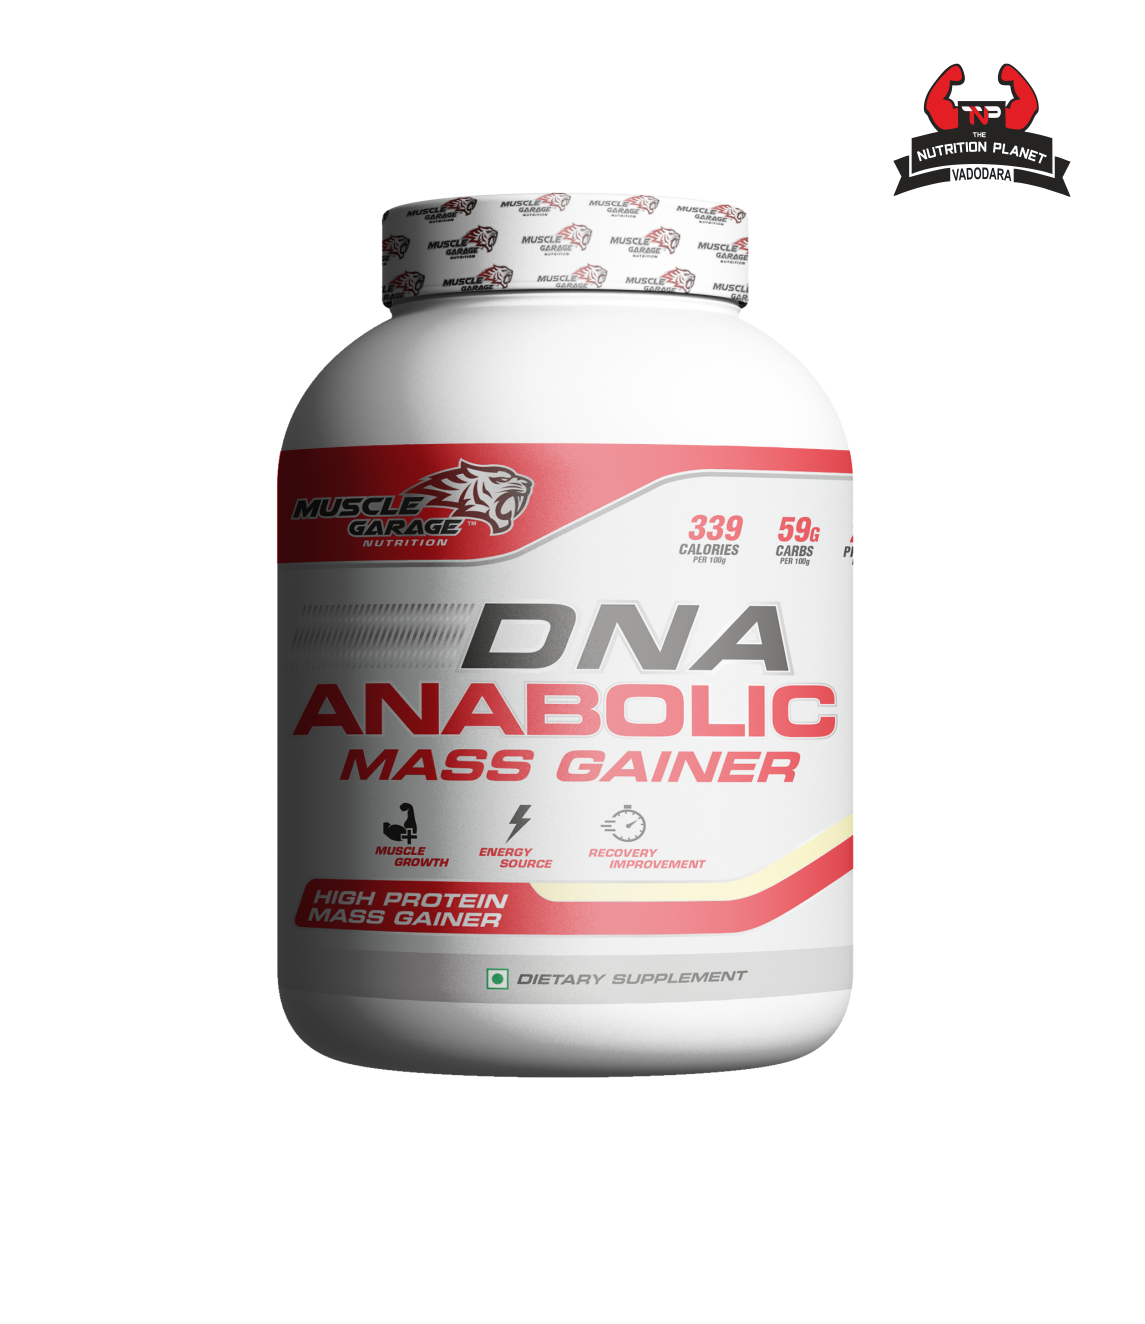 Muscle Garage DNA Anabolic Mass Gainer 6lbs 54 Servings  (2.72 kg, Chocolate)